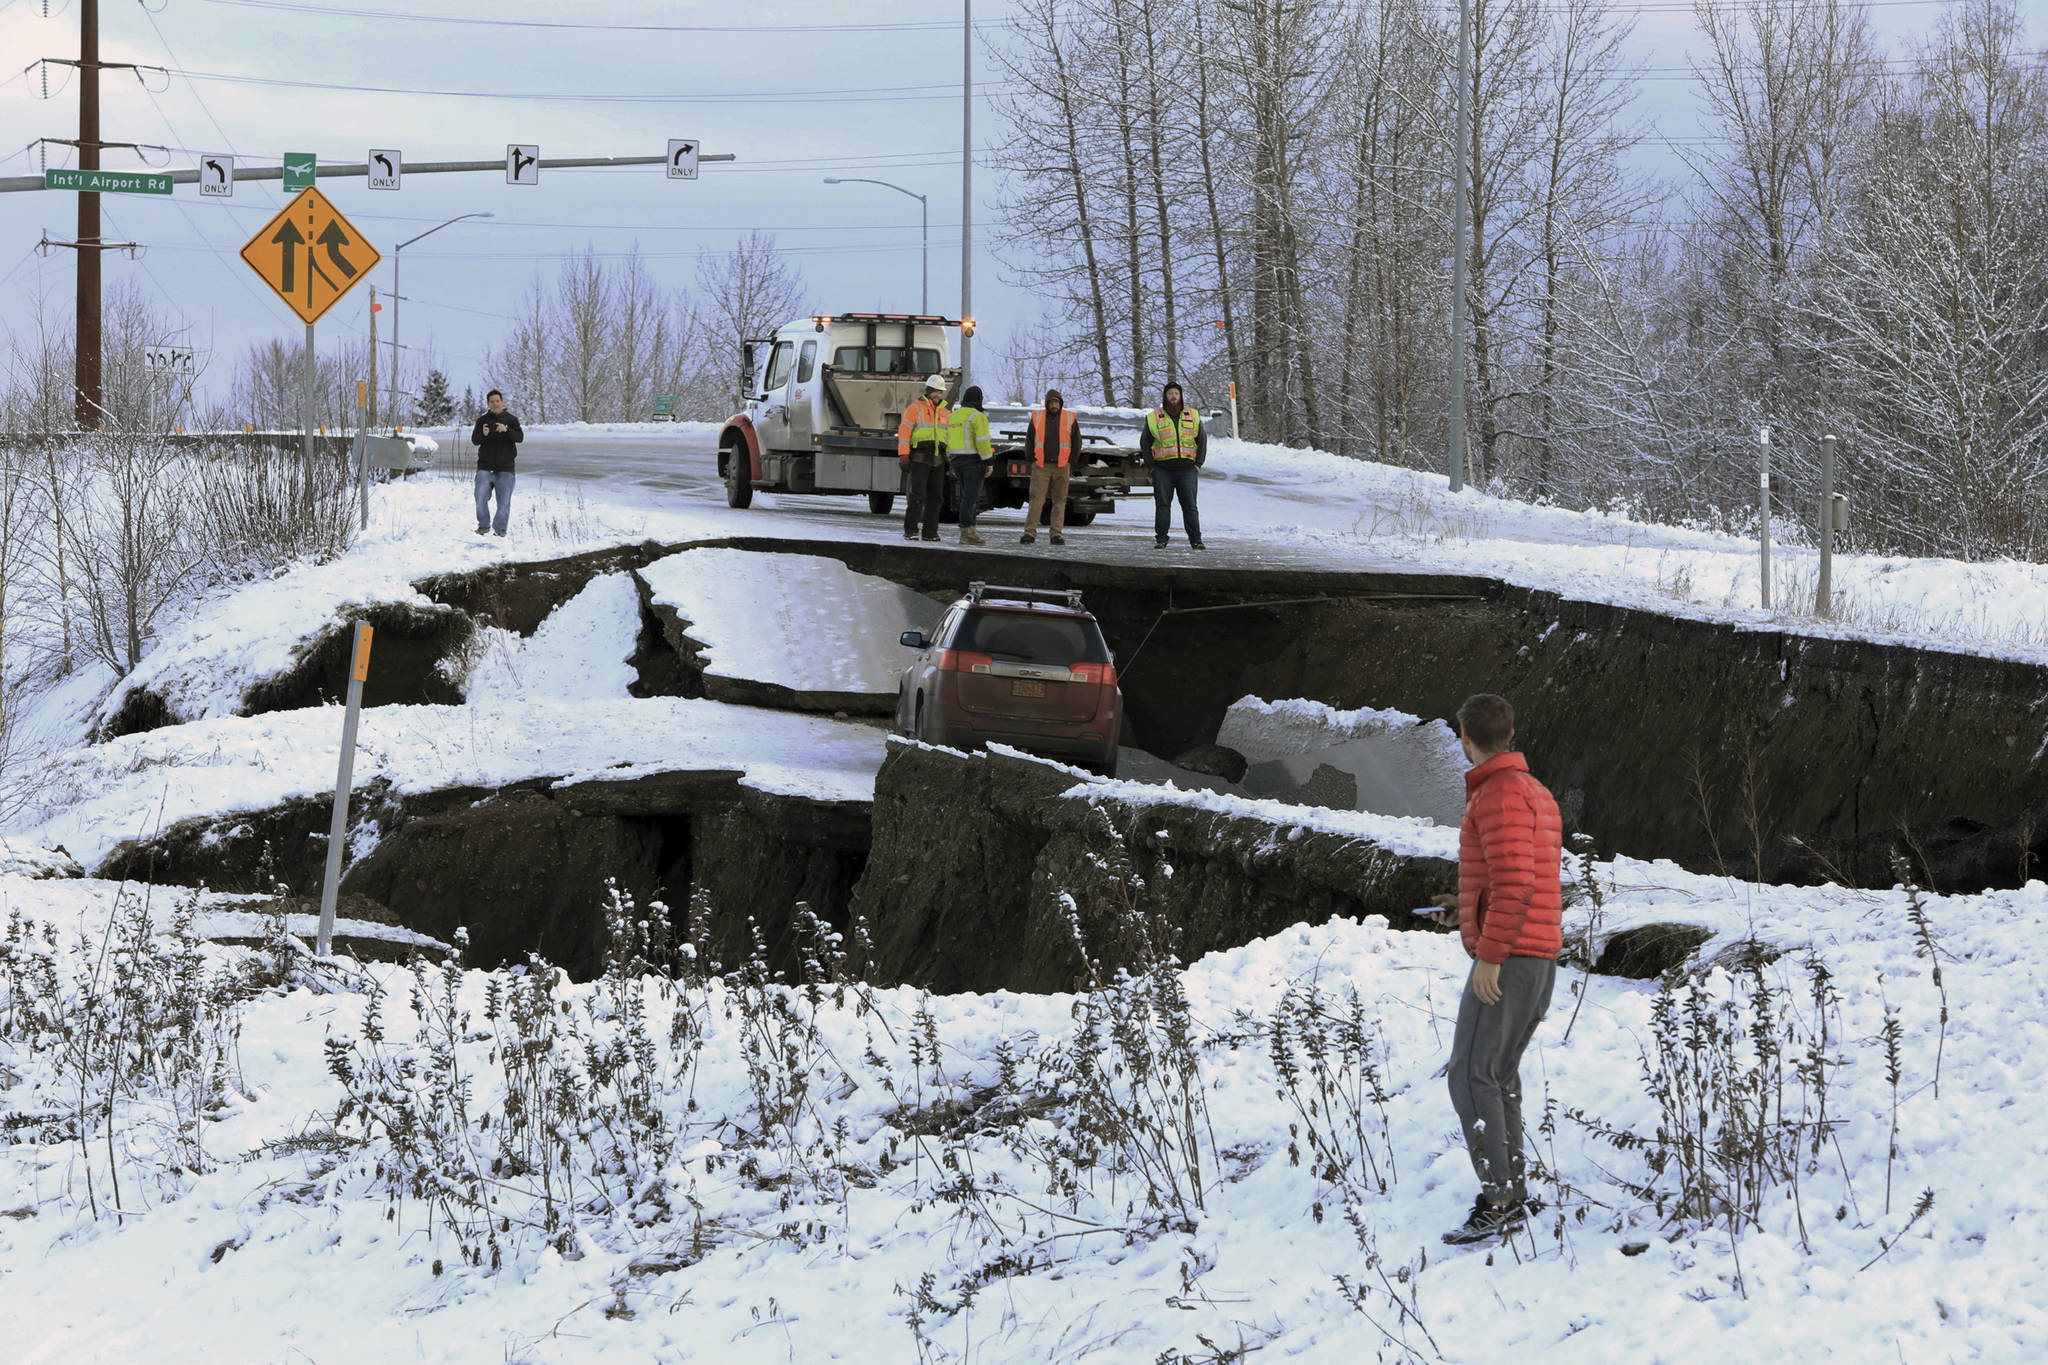 Highway workers and spectators look at Sulczynski’s car stuck on a section of an off-ramp that collapsed during an earthquake Friday morning, Nov. 30, 2018 in Anchorage, Alaska. Sulczynski was not injured attempting to exit Minnesota Drive at International Airport Road. Back-to-back earthquakes measuring 7.0 and 5.8 rocked buildings and buckled roads Friday morning in Anchorage, prompting people to run from their offices or seek shelter under office desks, while a tsunami warning had some seeking higher ground. (Photo by Dan Joling/Associated Press)